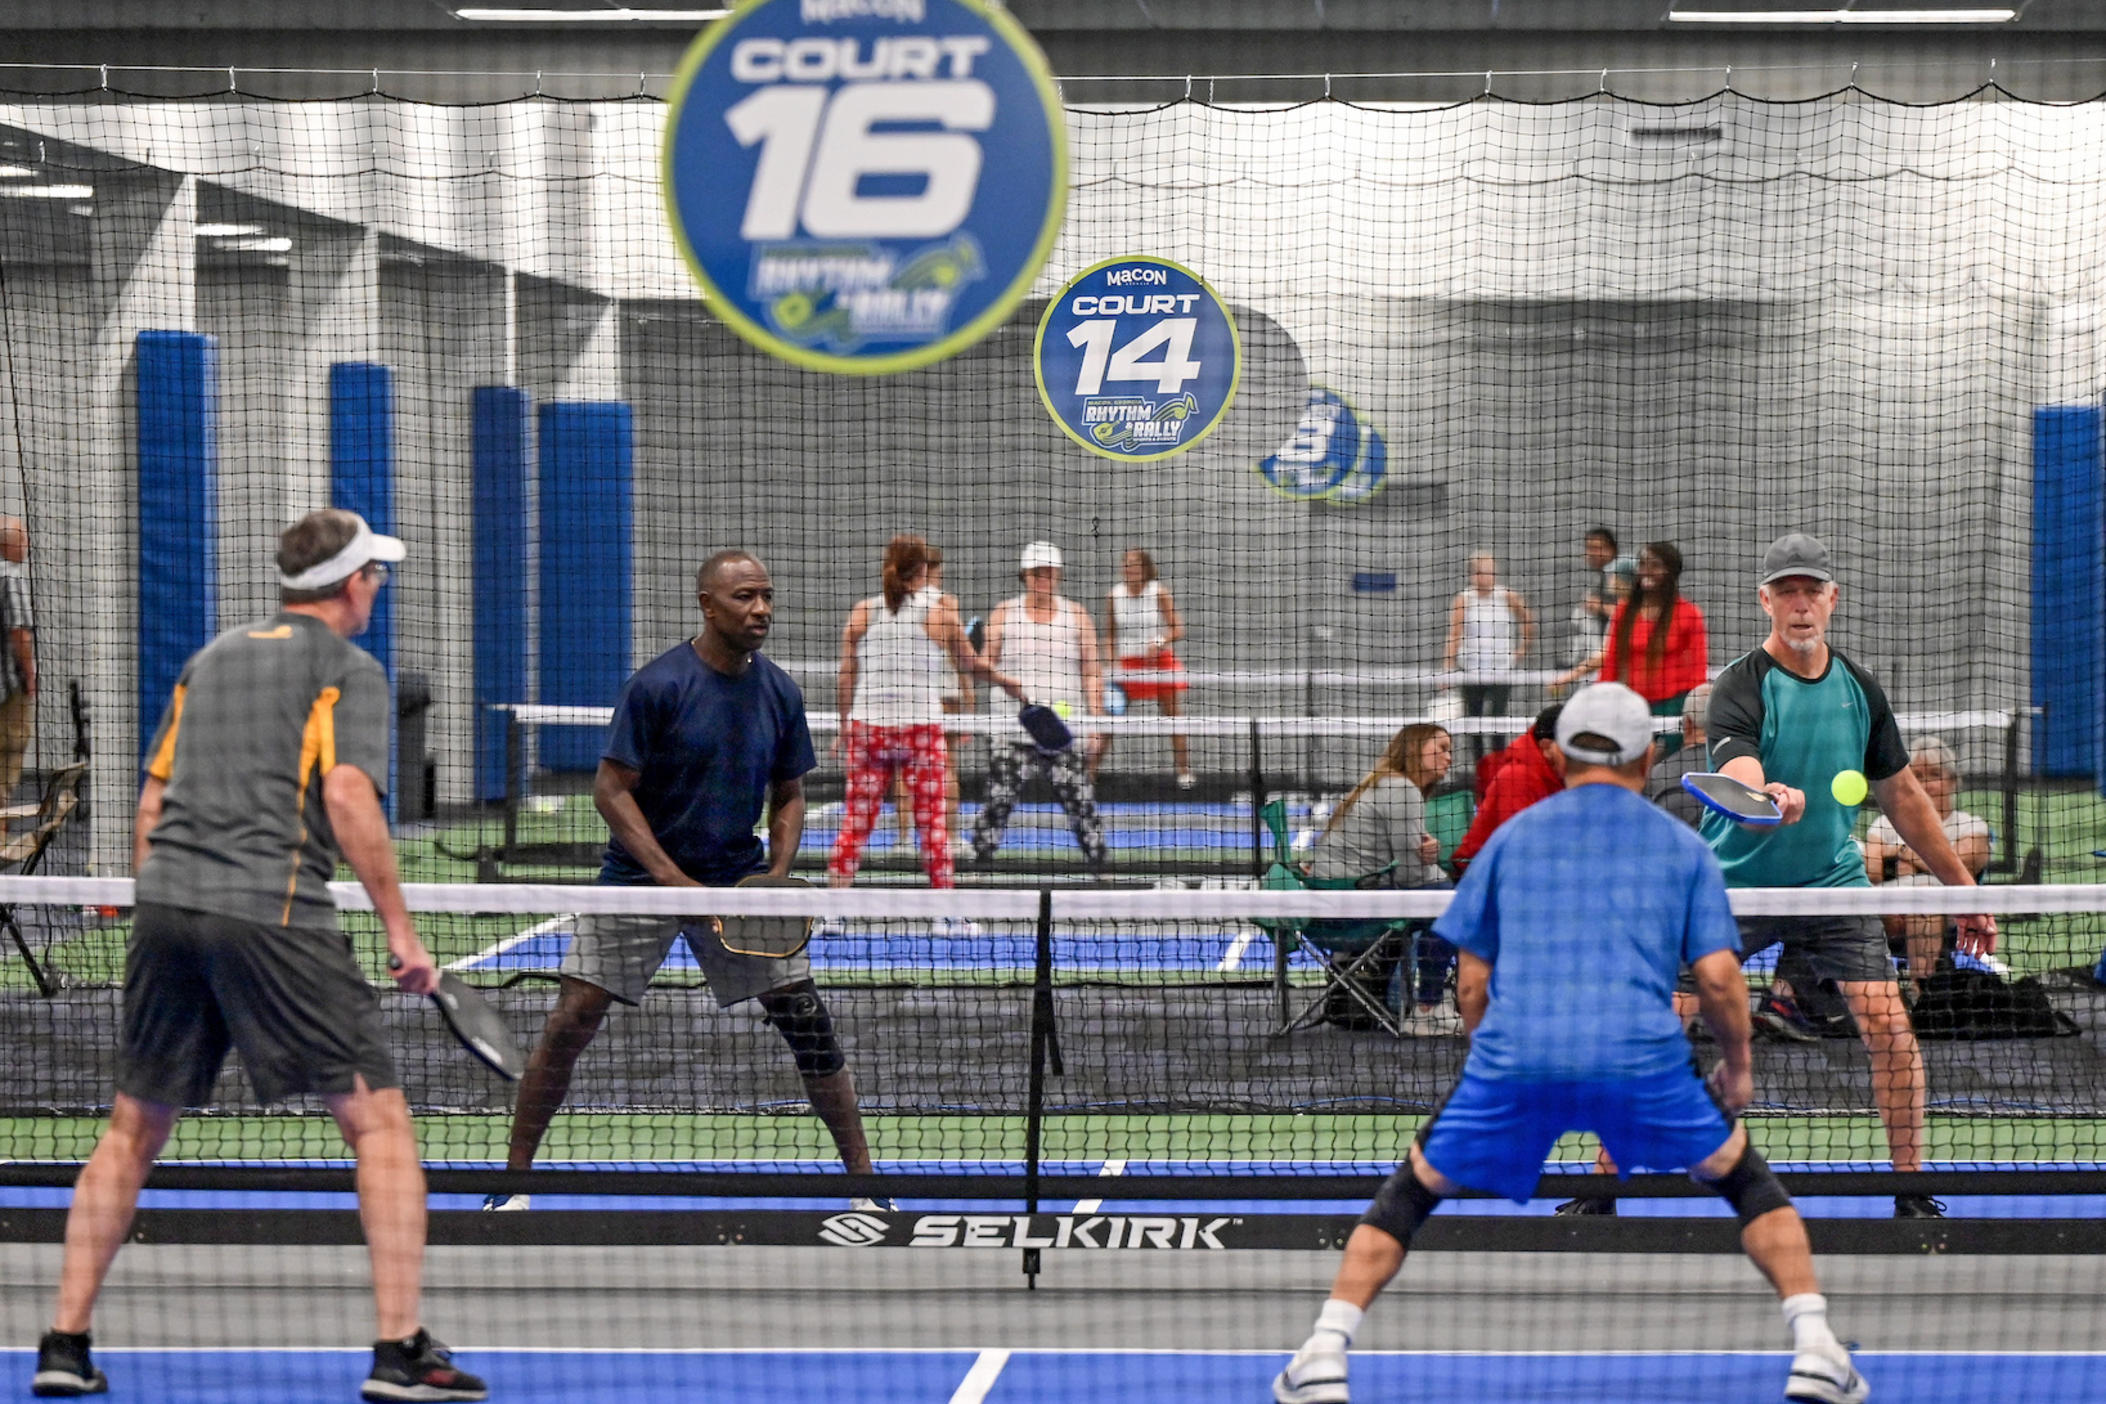 Pickleball players compete in the Southern Pickleball Association's Candy Cane Classic at Rhythm & Rally in Macon, Ga. 